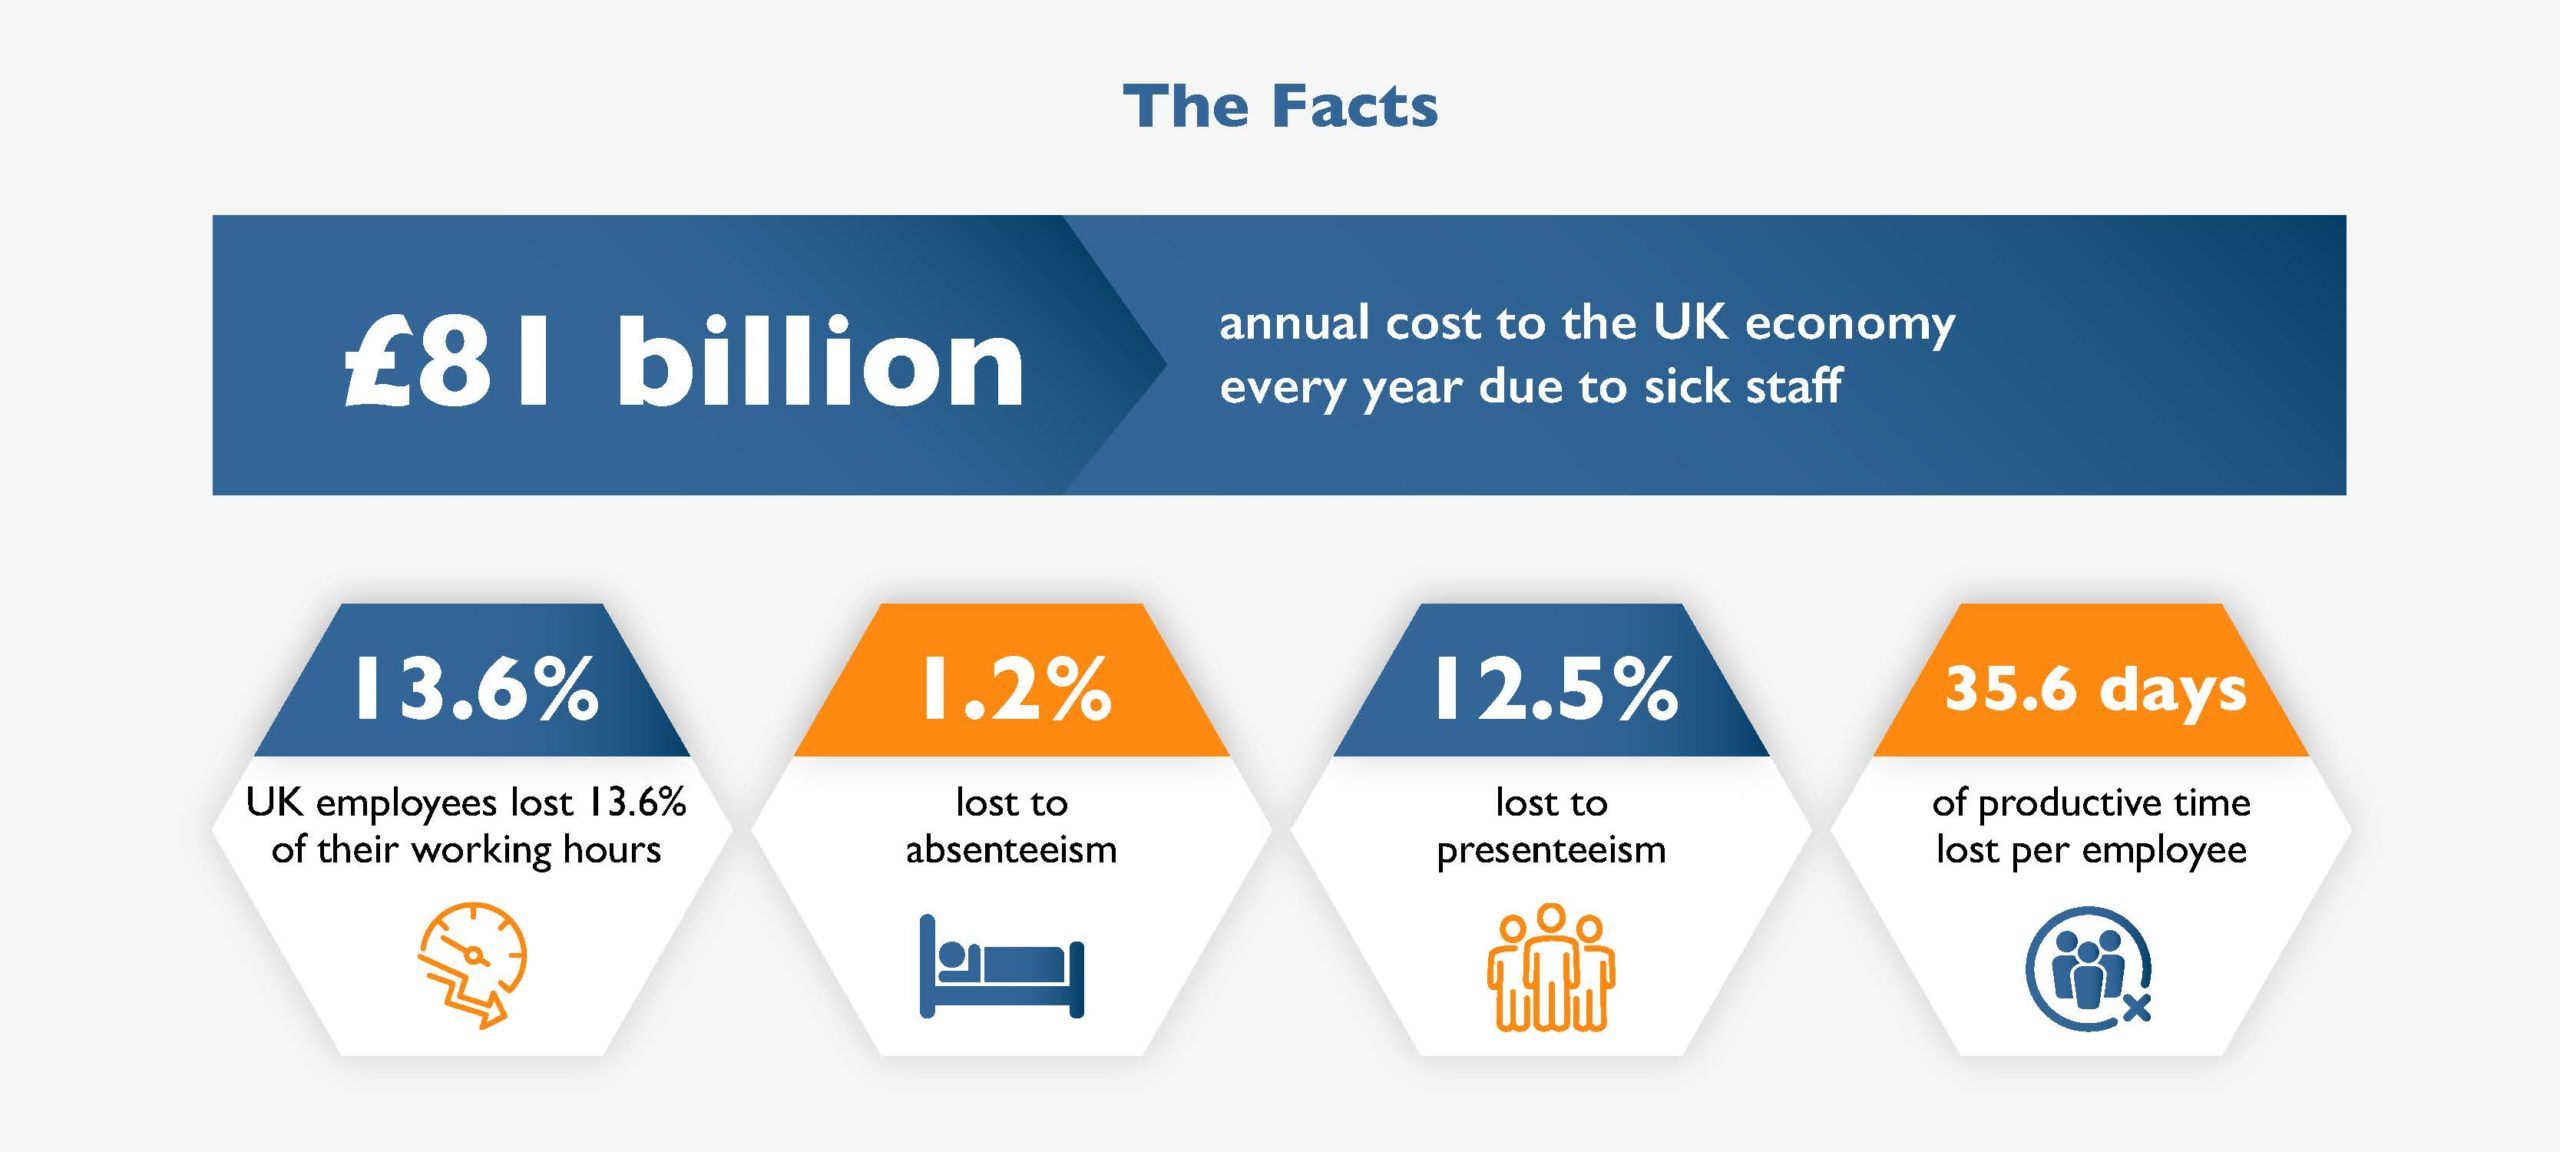 statistics diagram of annual cost to the UK due to staff sickness